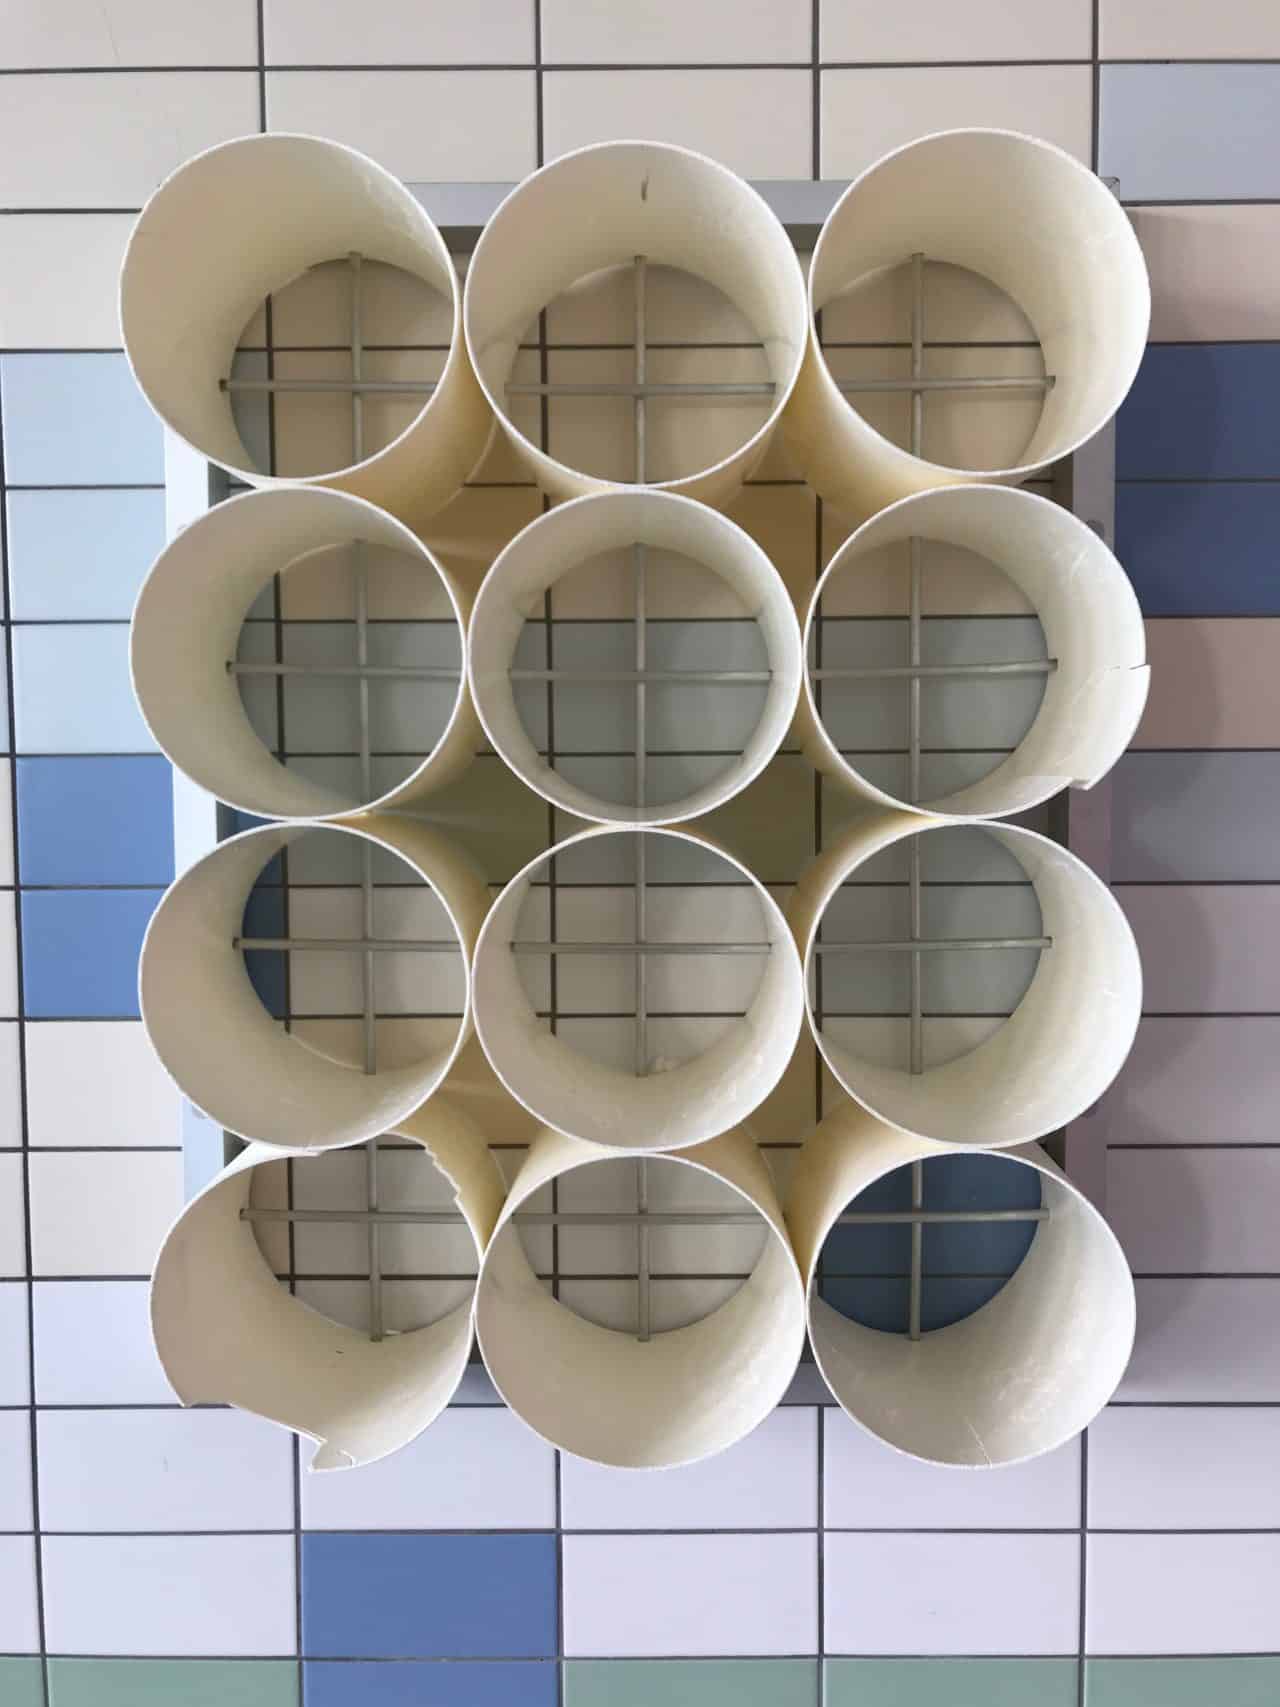 Storage Pipes Mounted On Tiled Wall